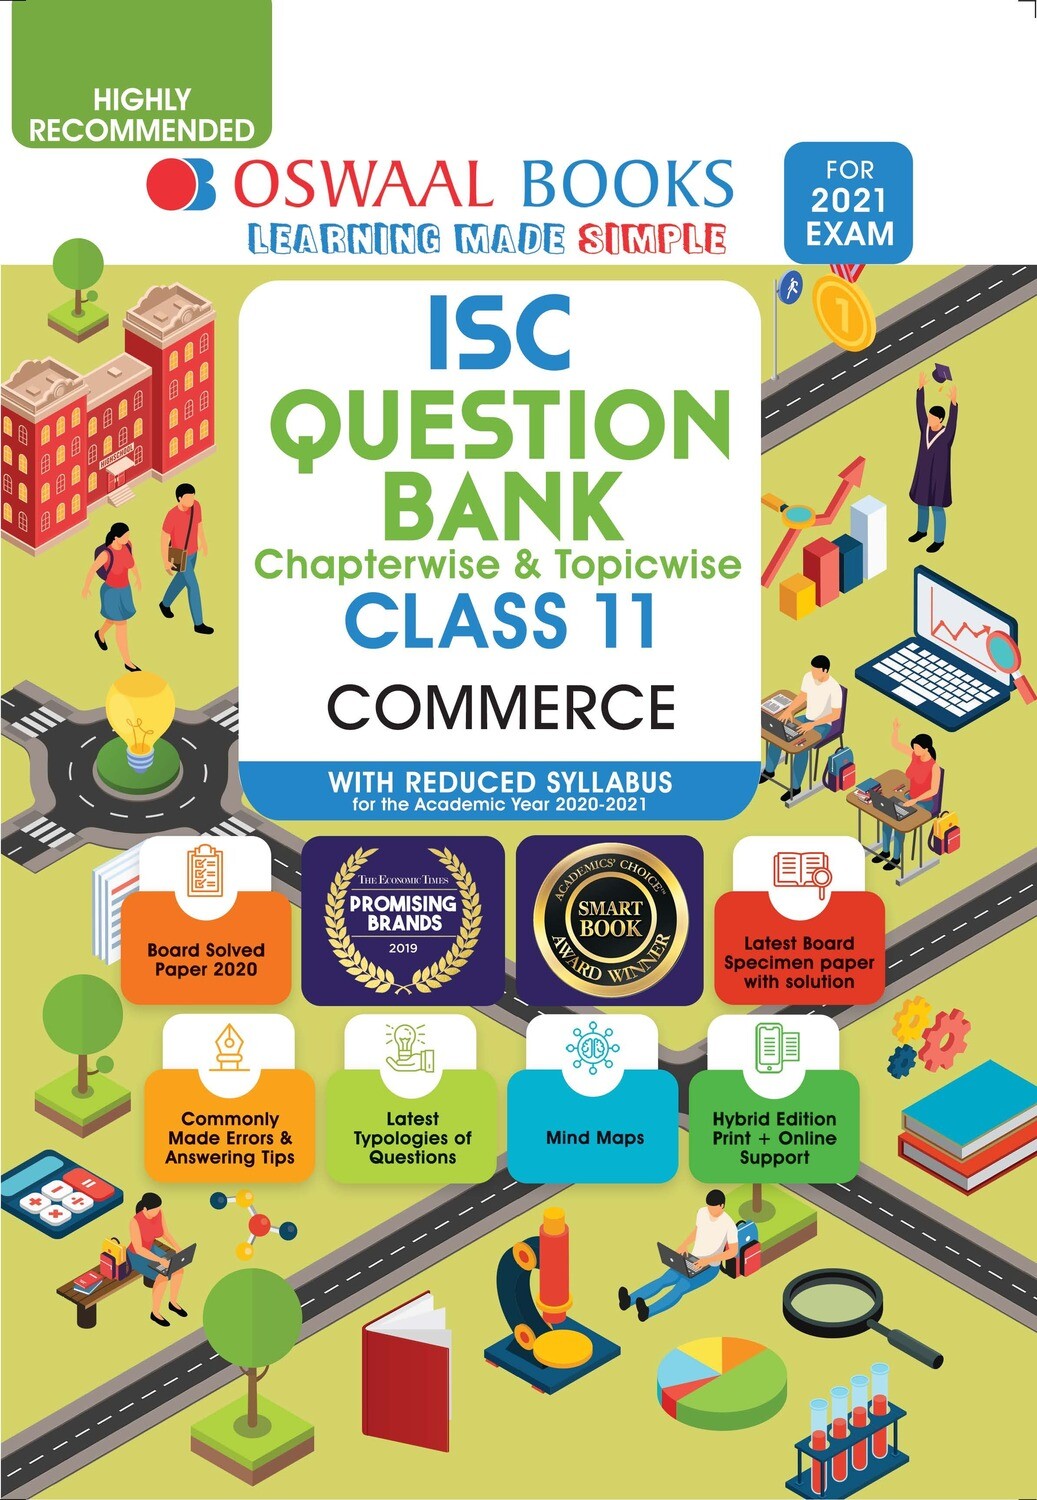 Buy e-book: Oswaal ISC Question Banks Class 11 Commerce (Reduced Syllabus) (For 2021 Exam)